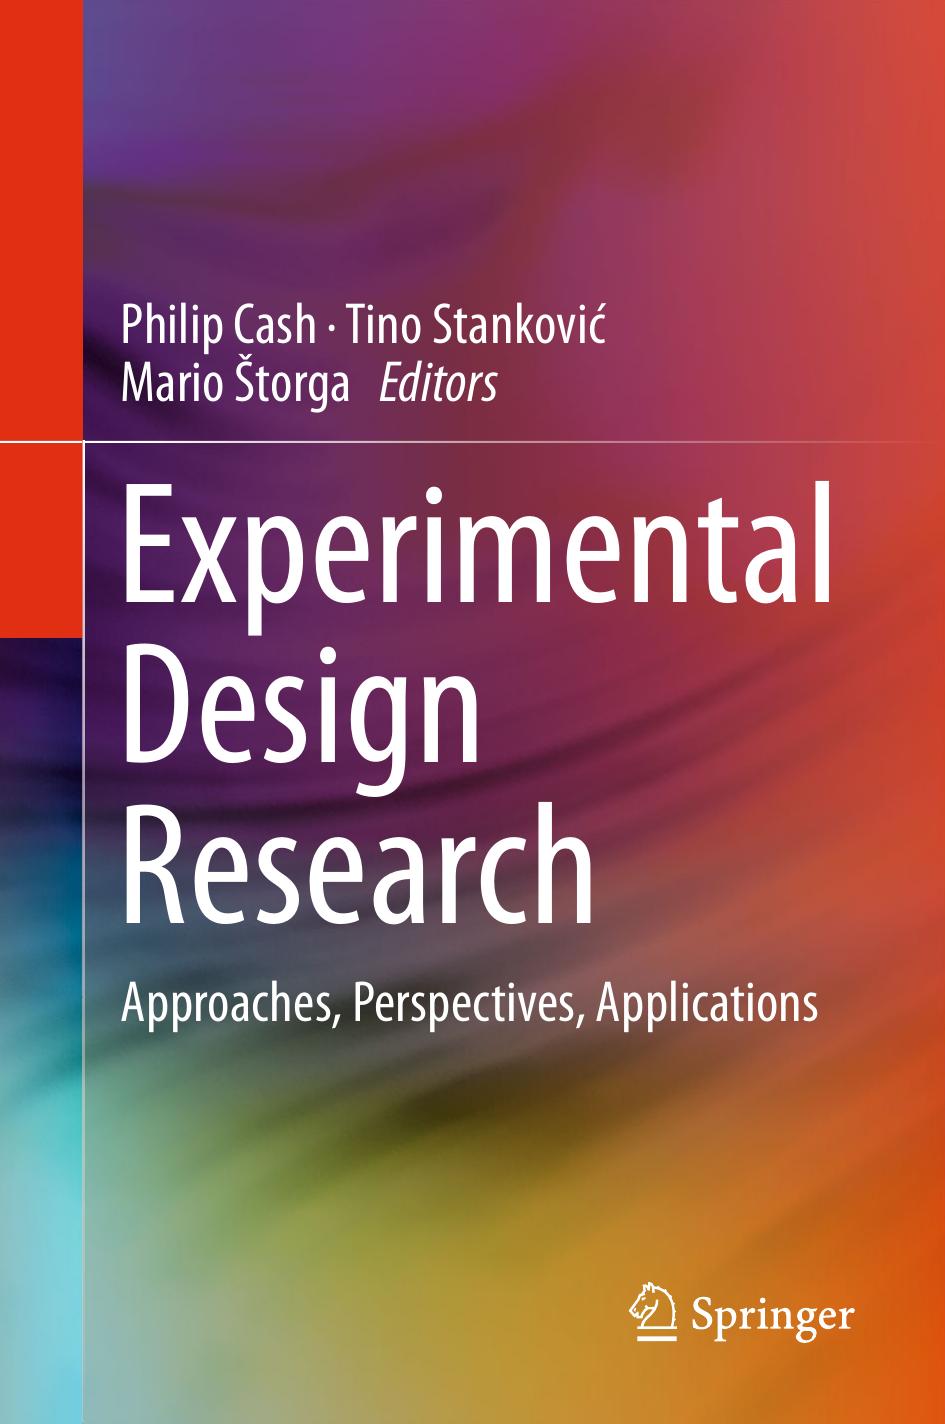 Experimental Design Research  Approaches, Perspectives, Applications ( PDFDrive ) 2016